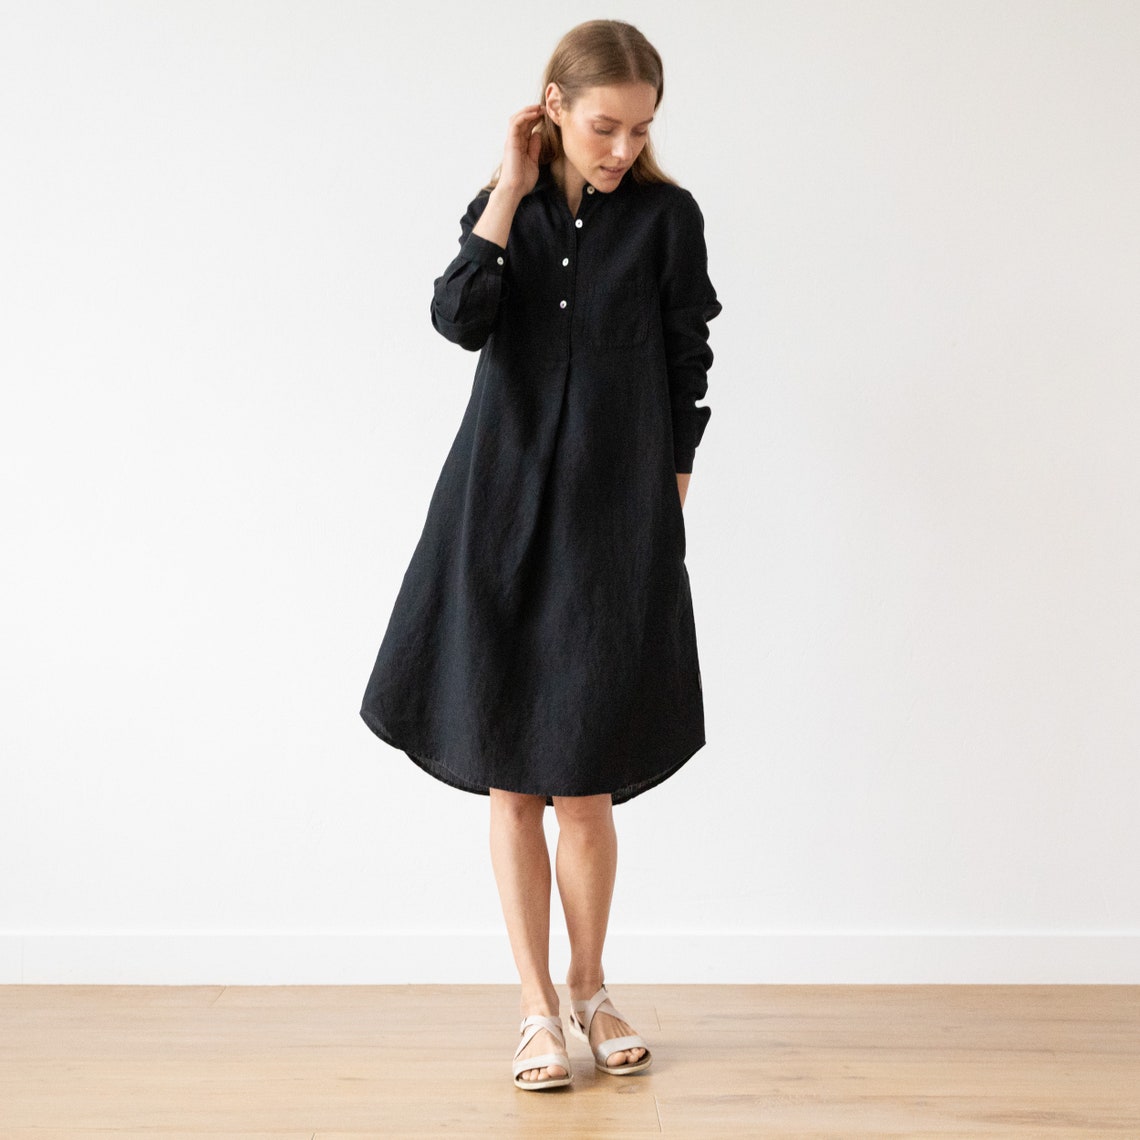 Washed Linen Shirt Dress in Black. Linen Clothing for Women in - Etsy